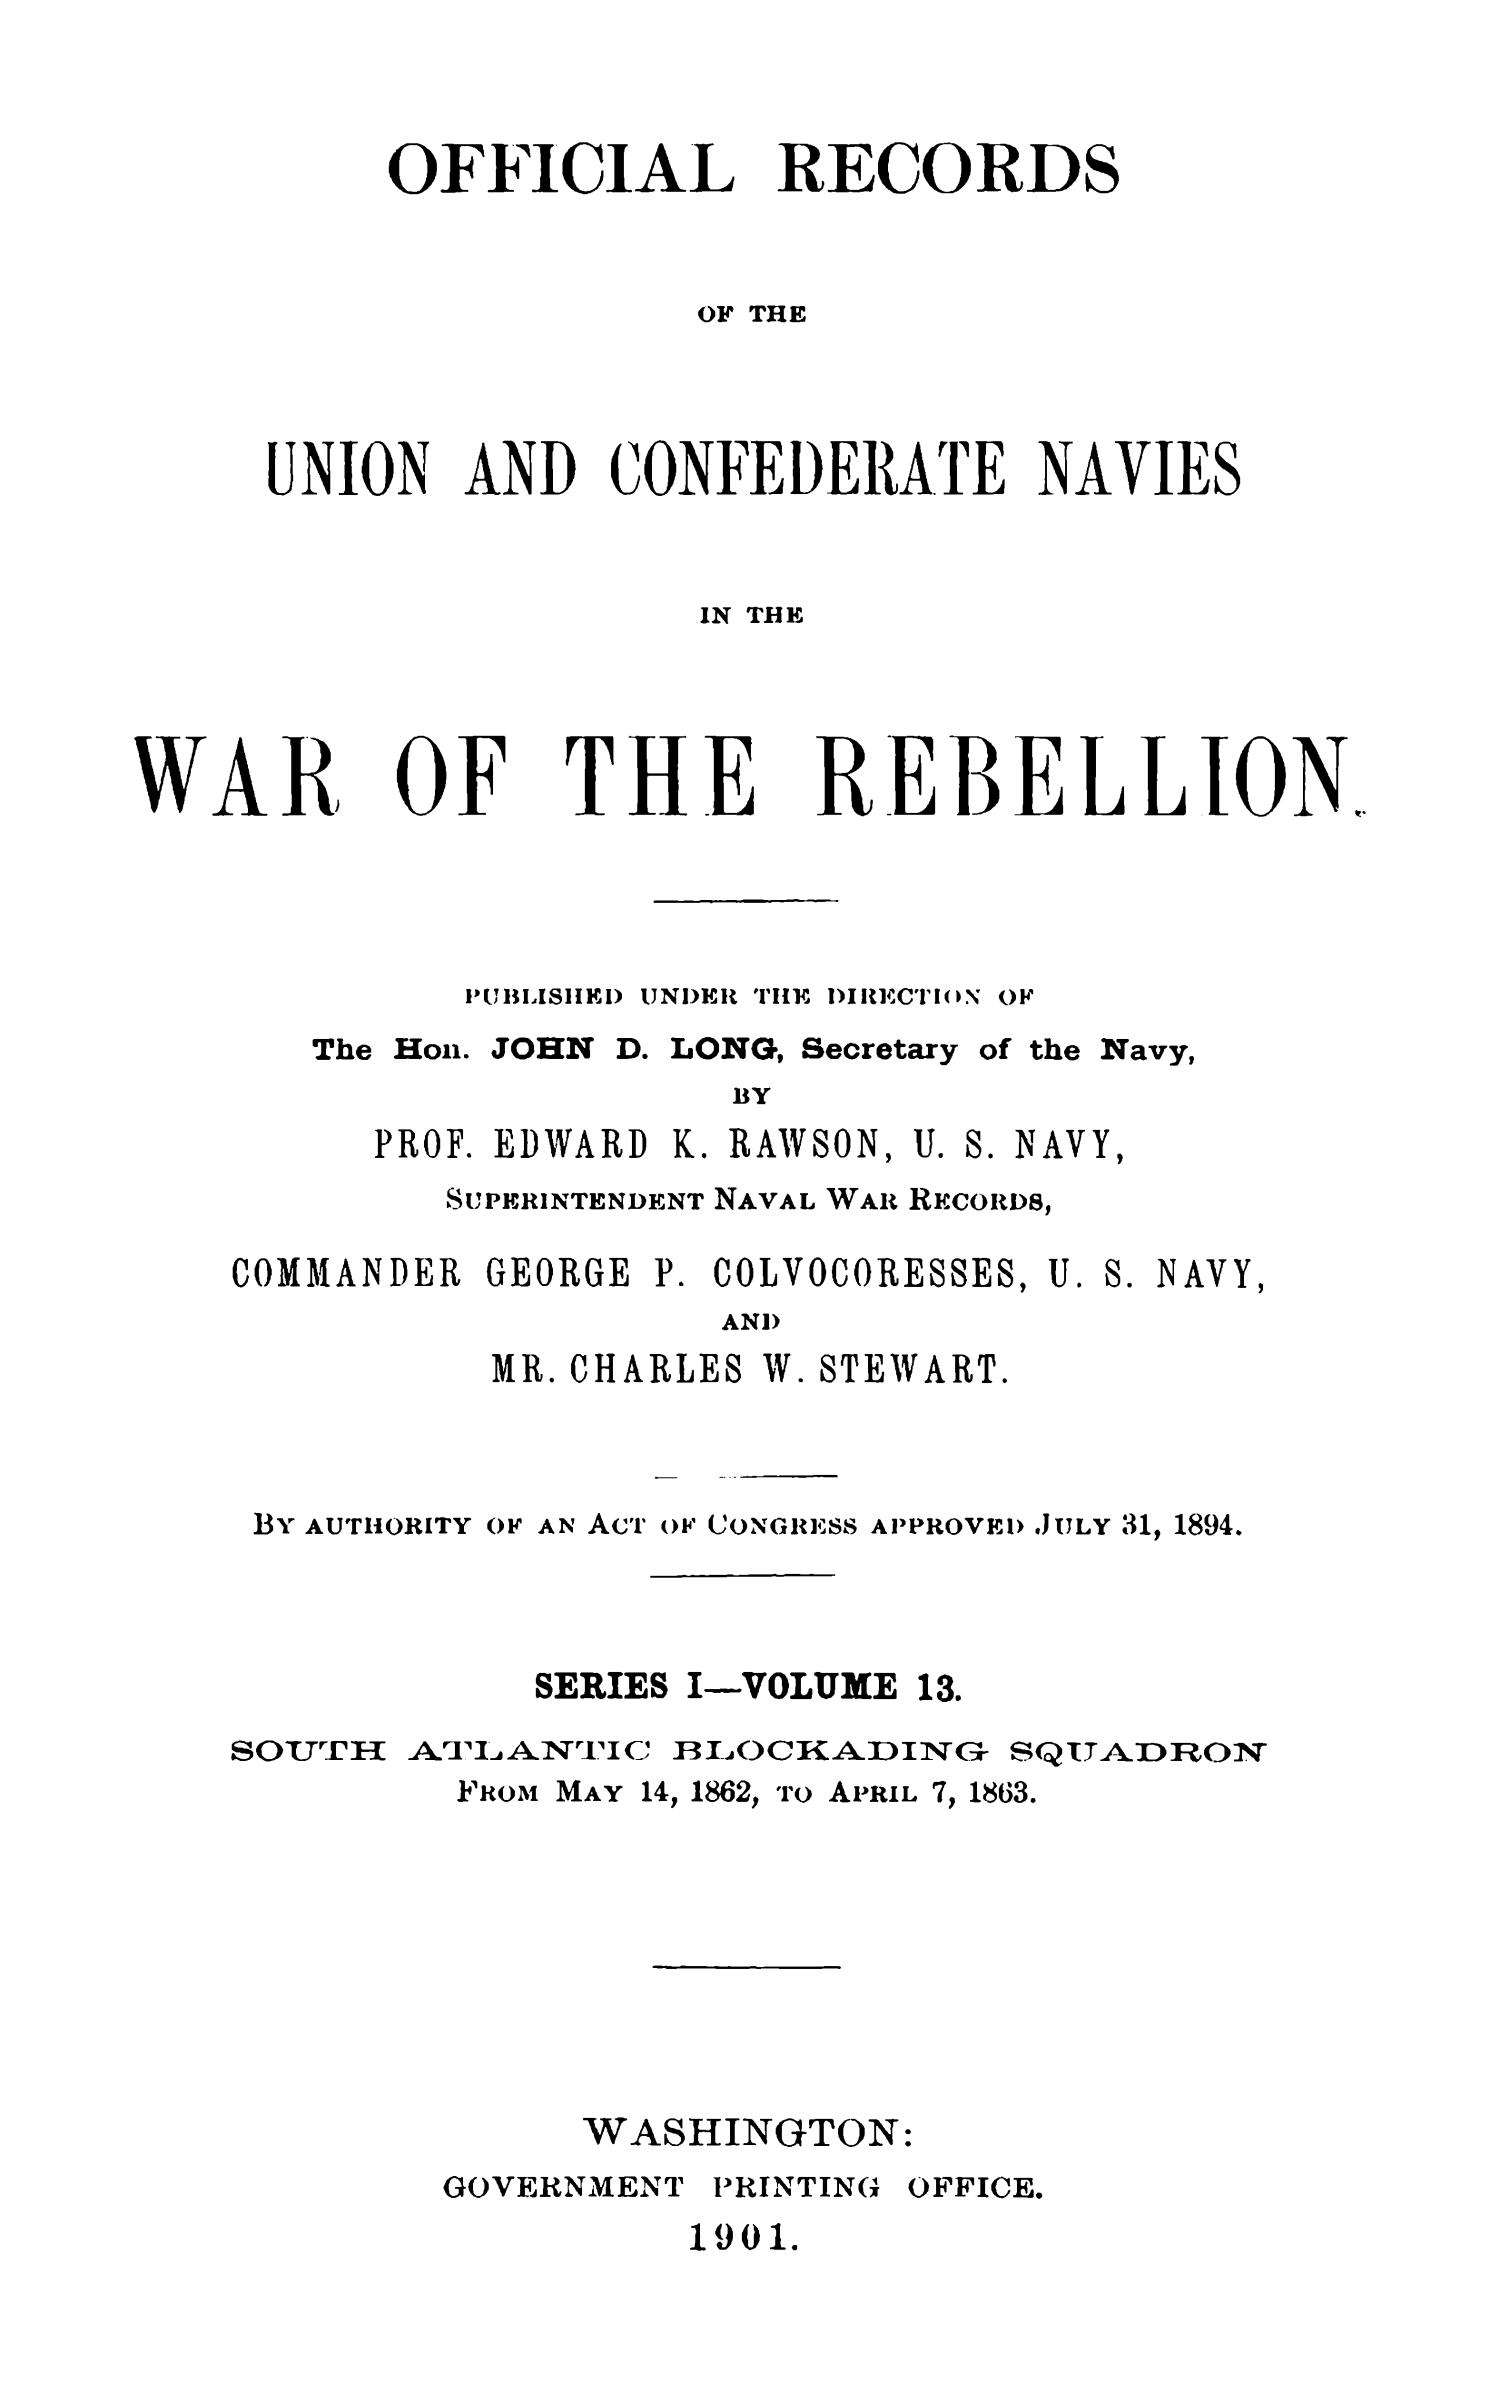 Official Records of the Union and Confederate Navies in the War of the Rebellion. Series 1, Volume 13.
                                                
                                                    Title Page
                                                